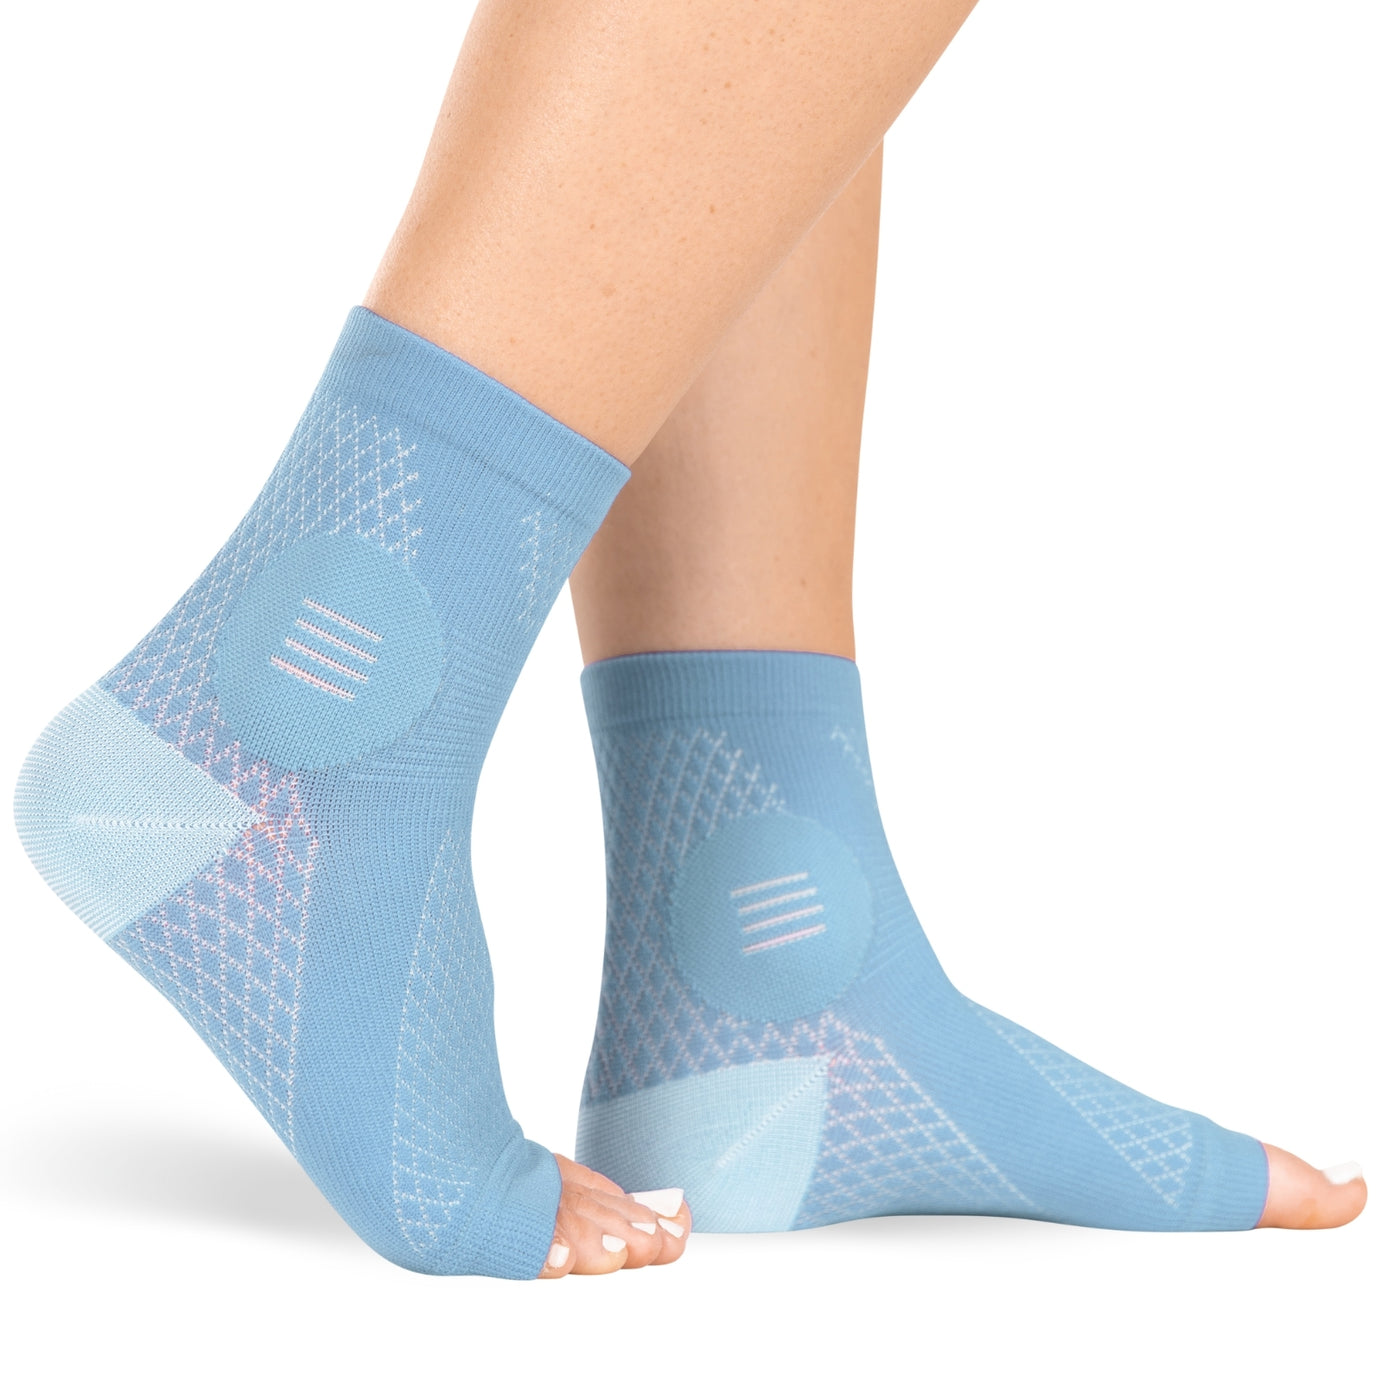 The BraceAbility light blue compression neuropathy socks give quick relief from painful peripheral neuropathy and nerve damage with these socks for diabetic foot pain.